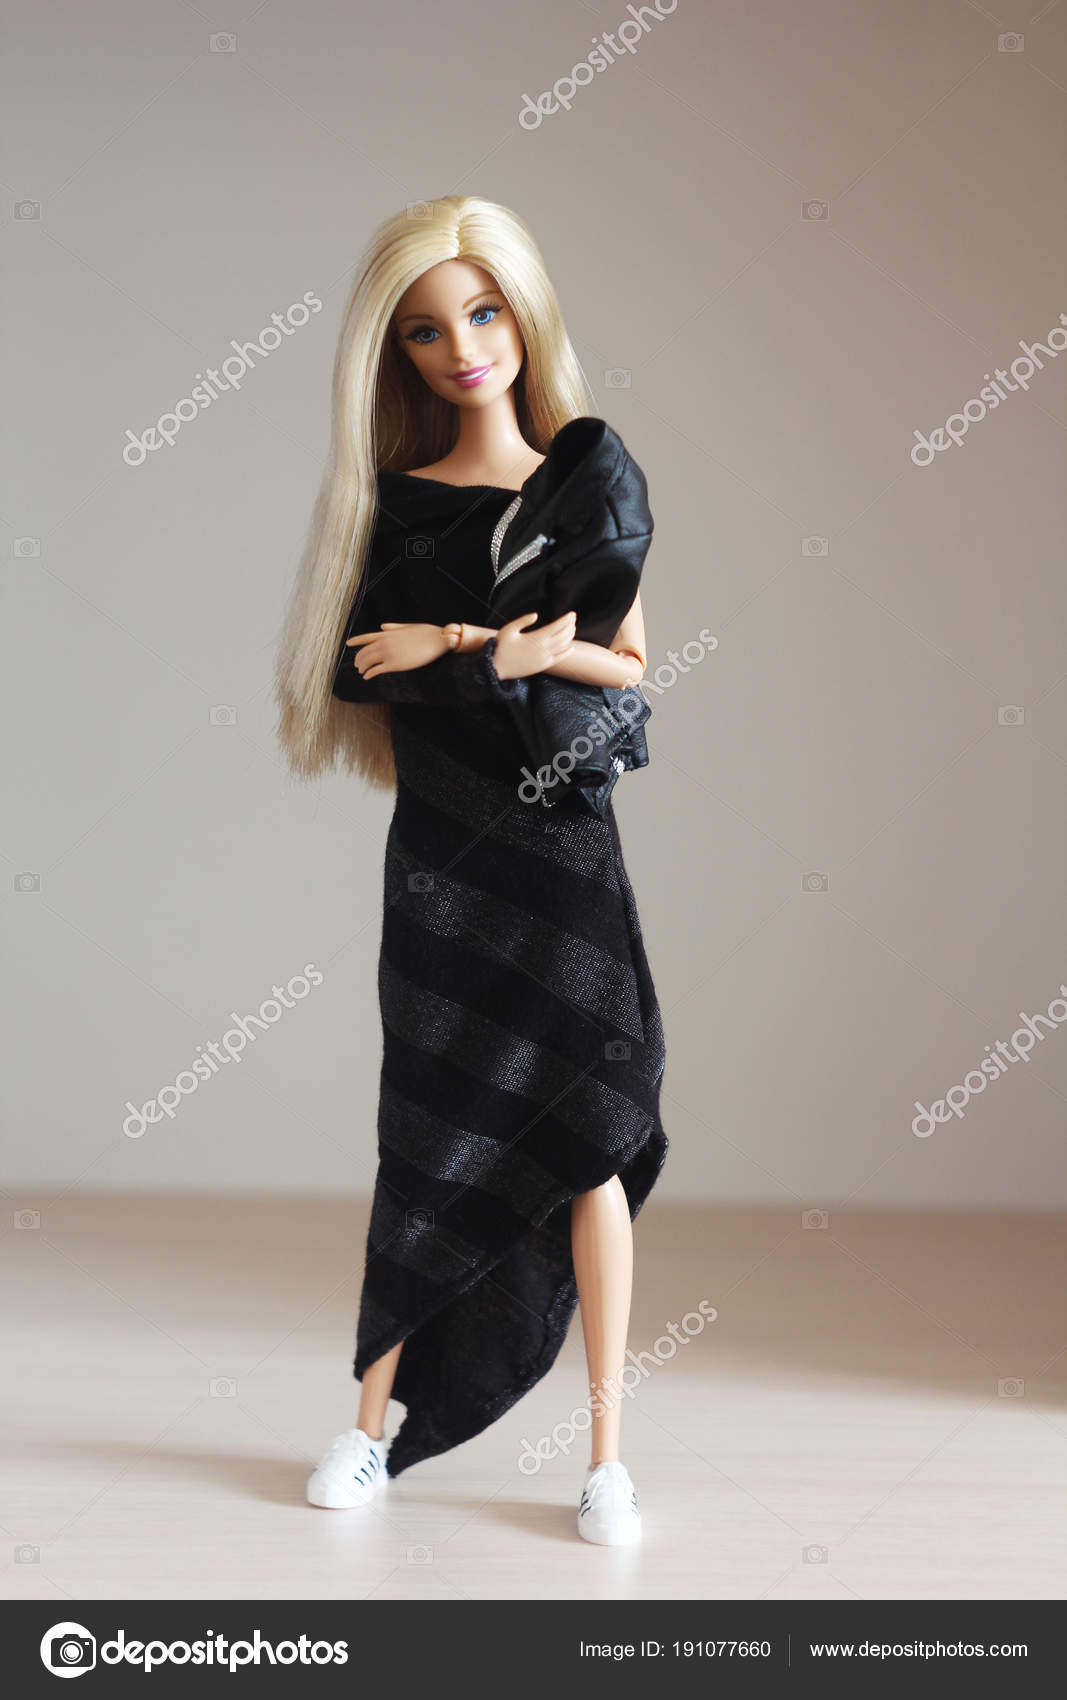 Barbie Doll Long White Hair Beautiful Clothes – Stock Editorial ...